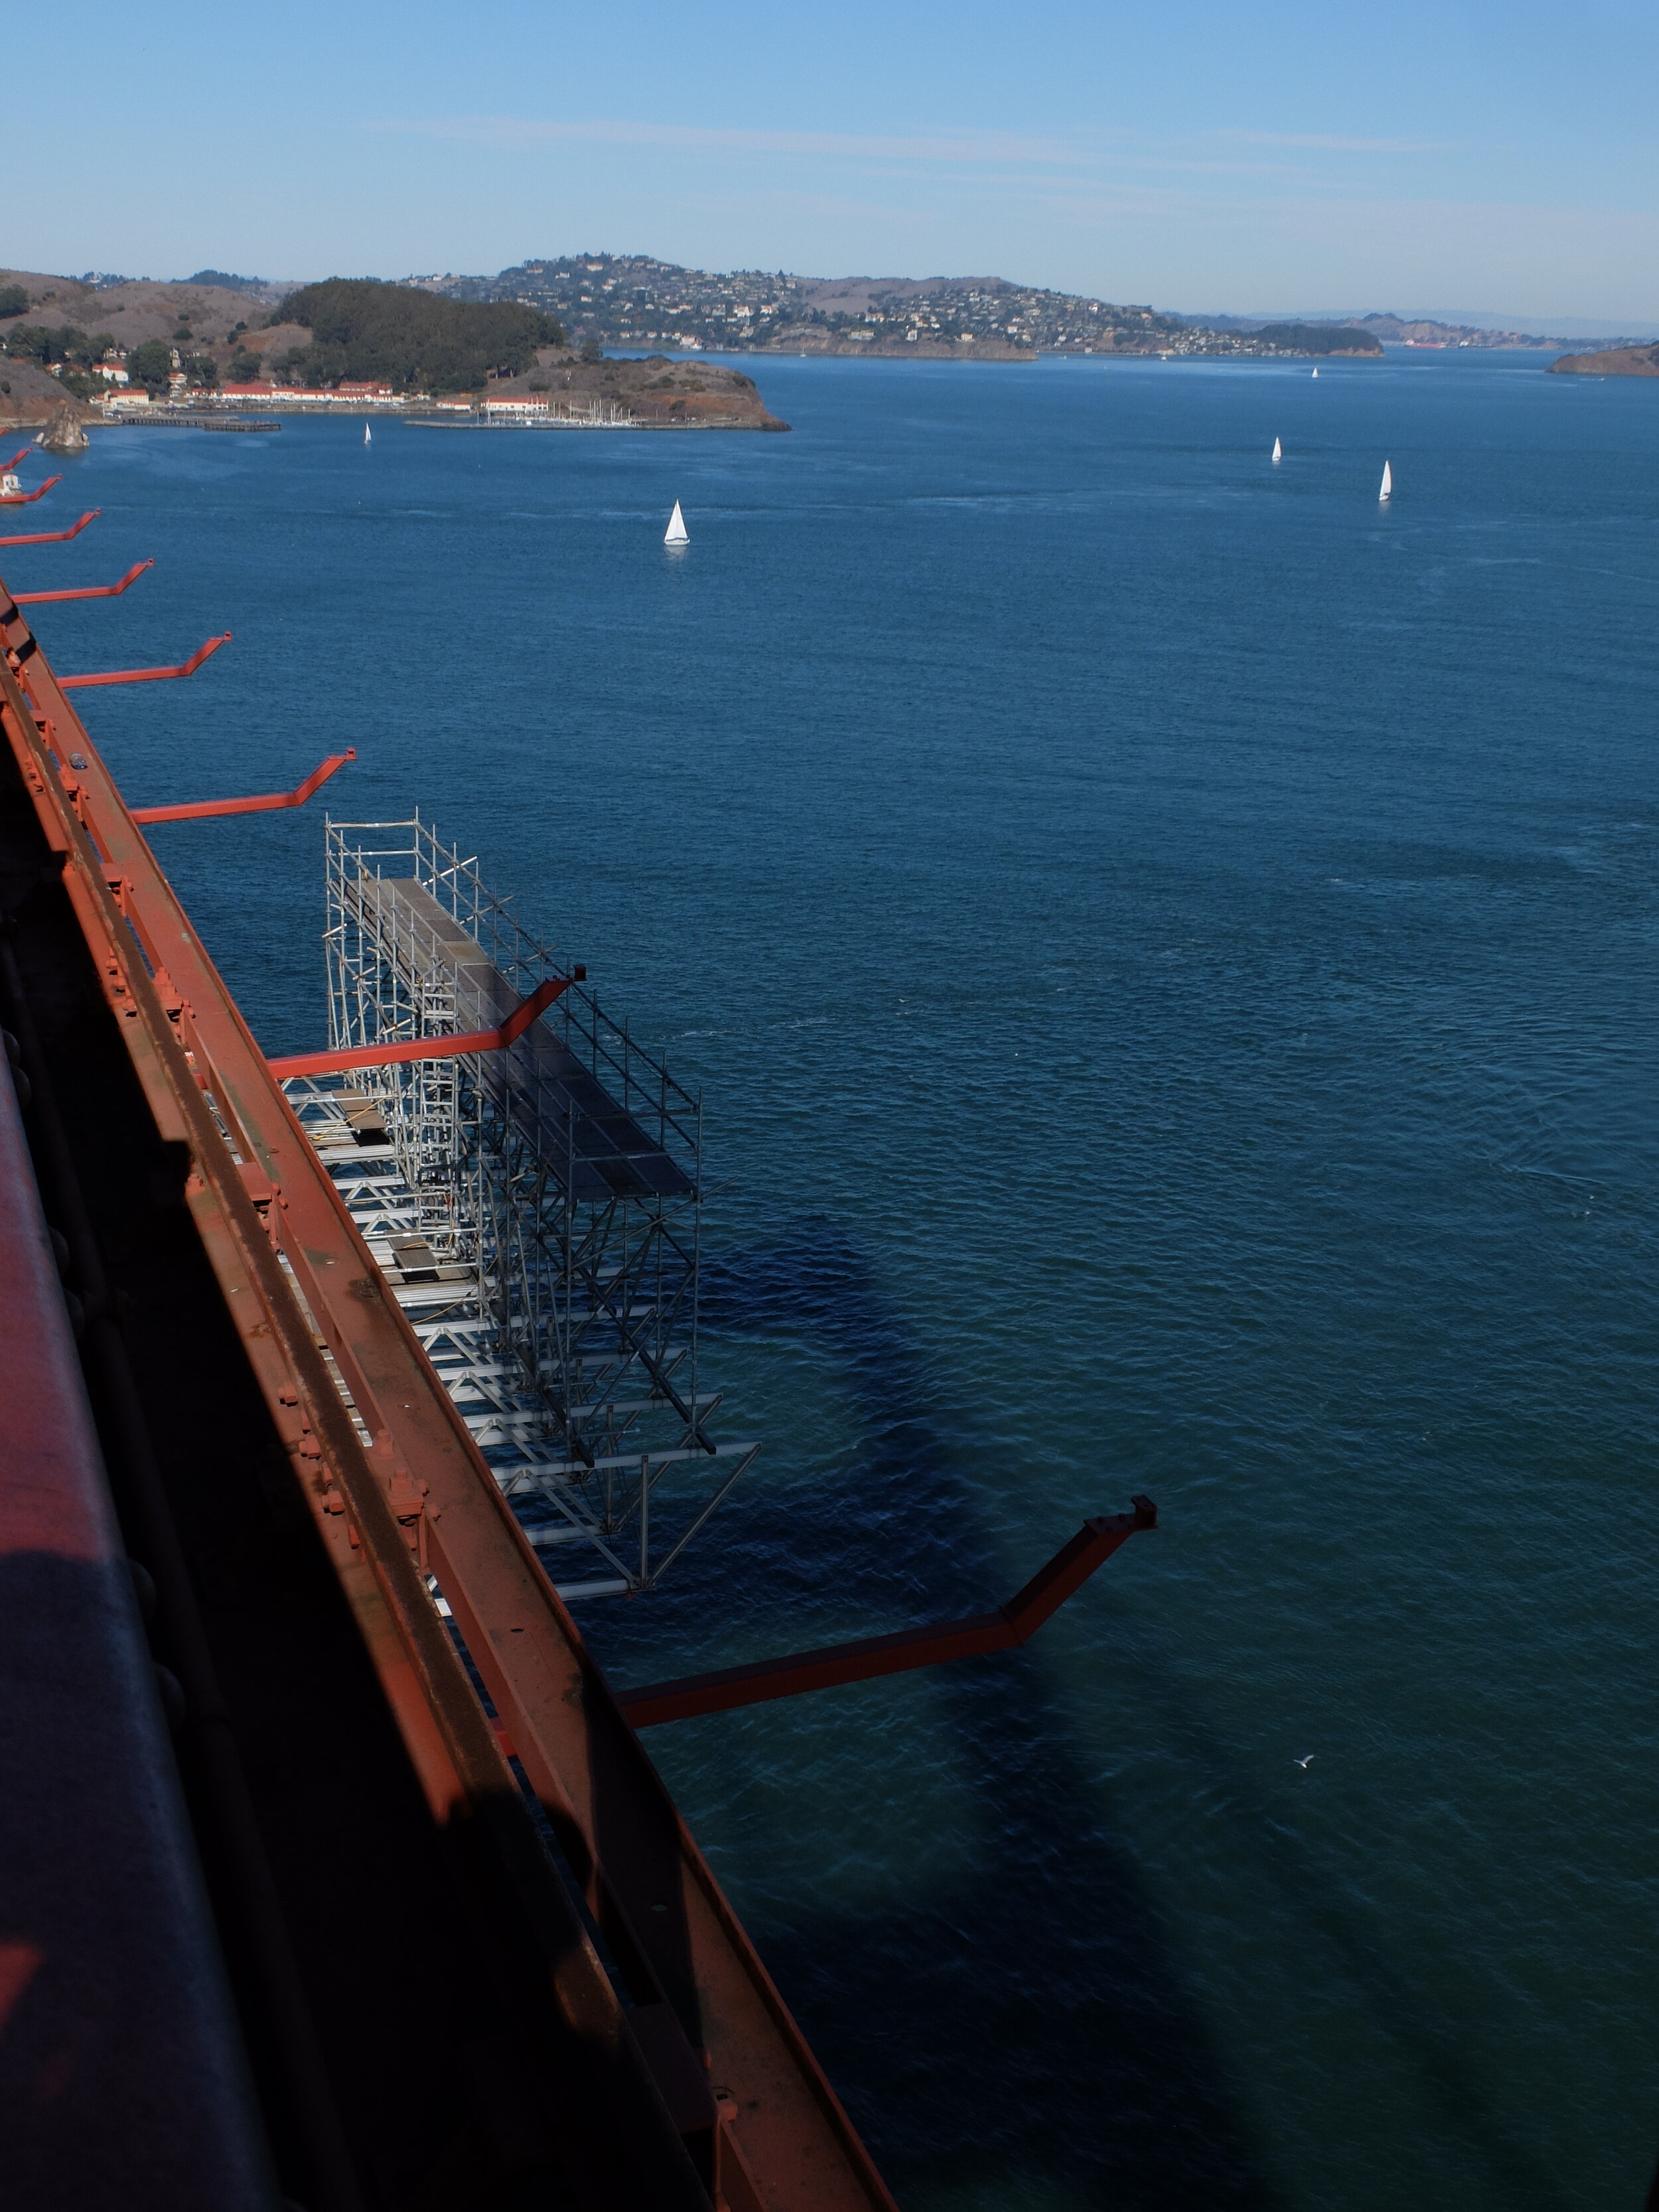 They're finally installing a suicide deterrant net on the Golden Gate Bridge.